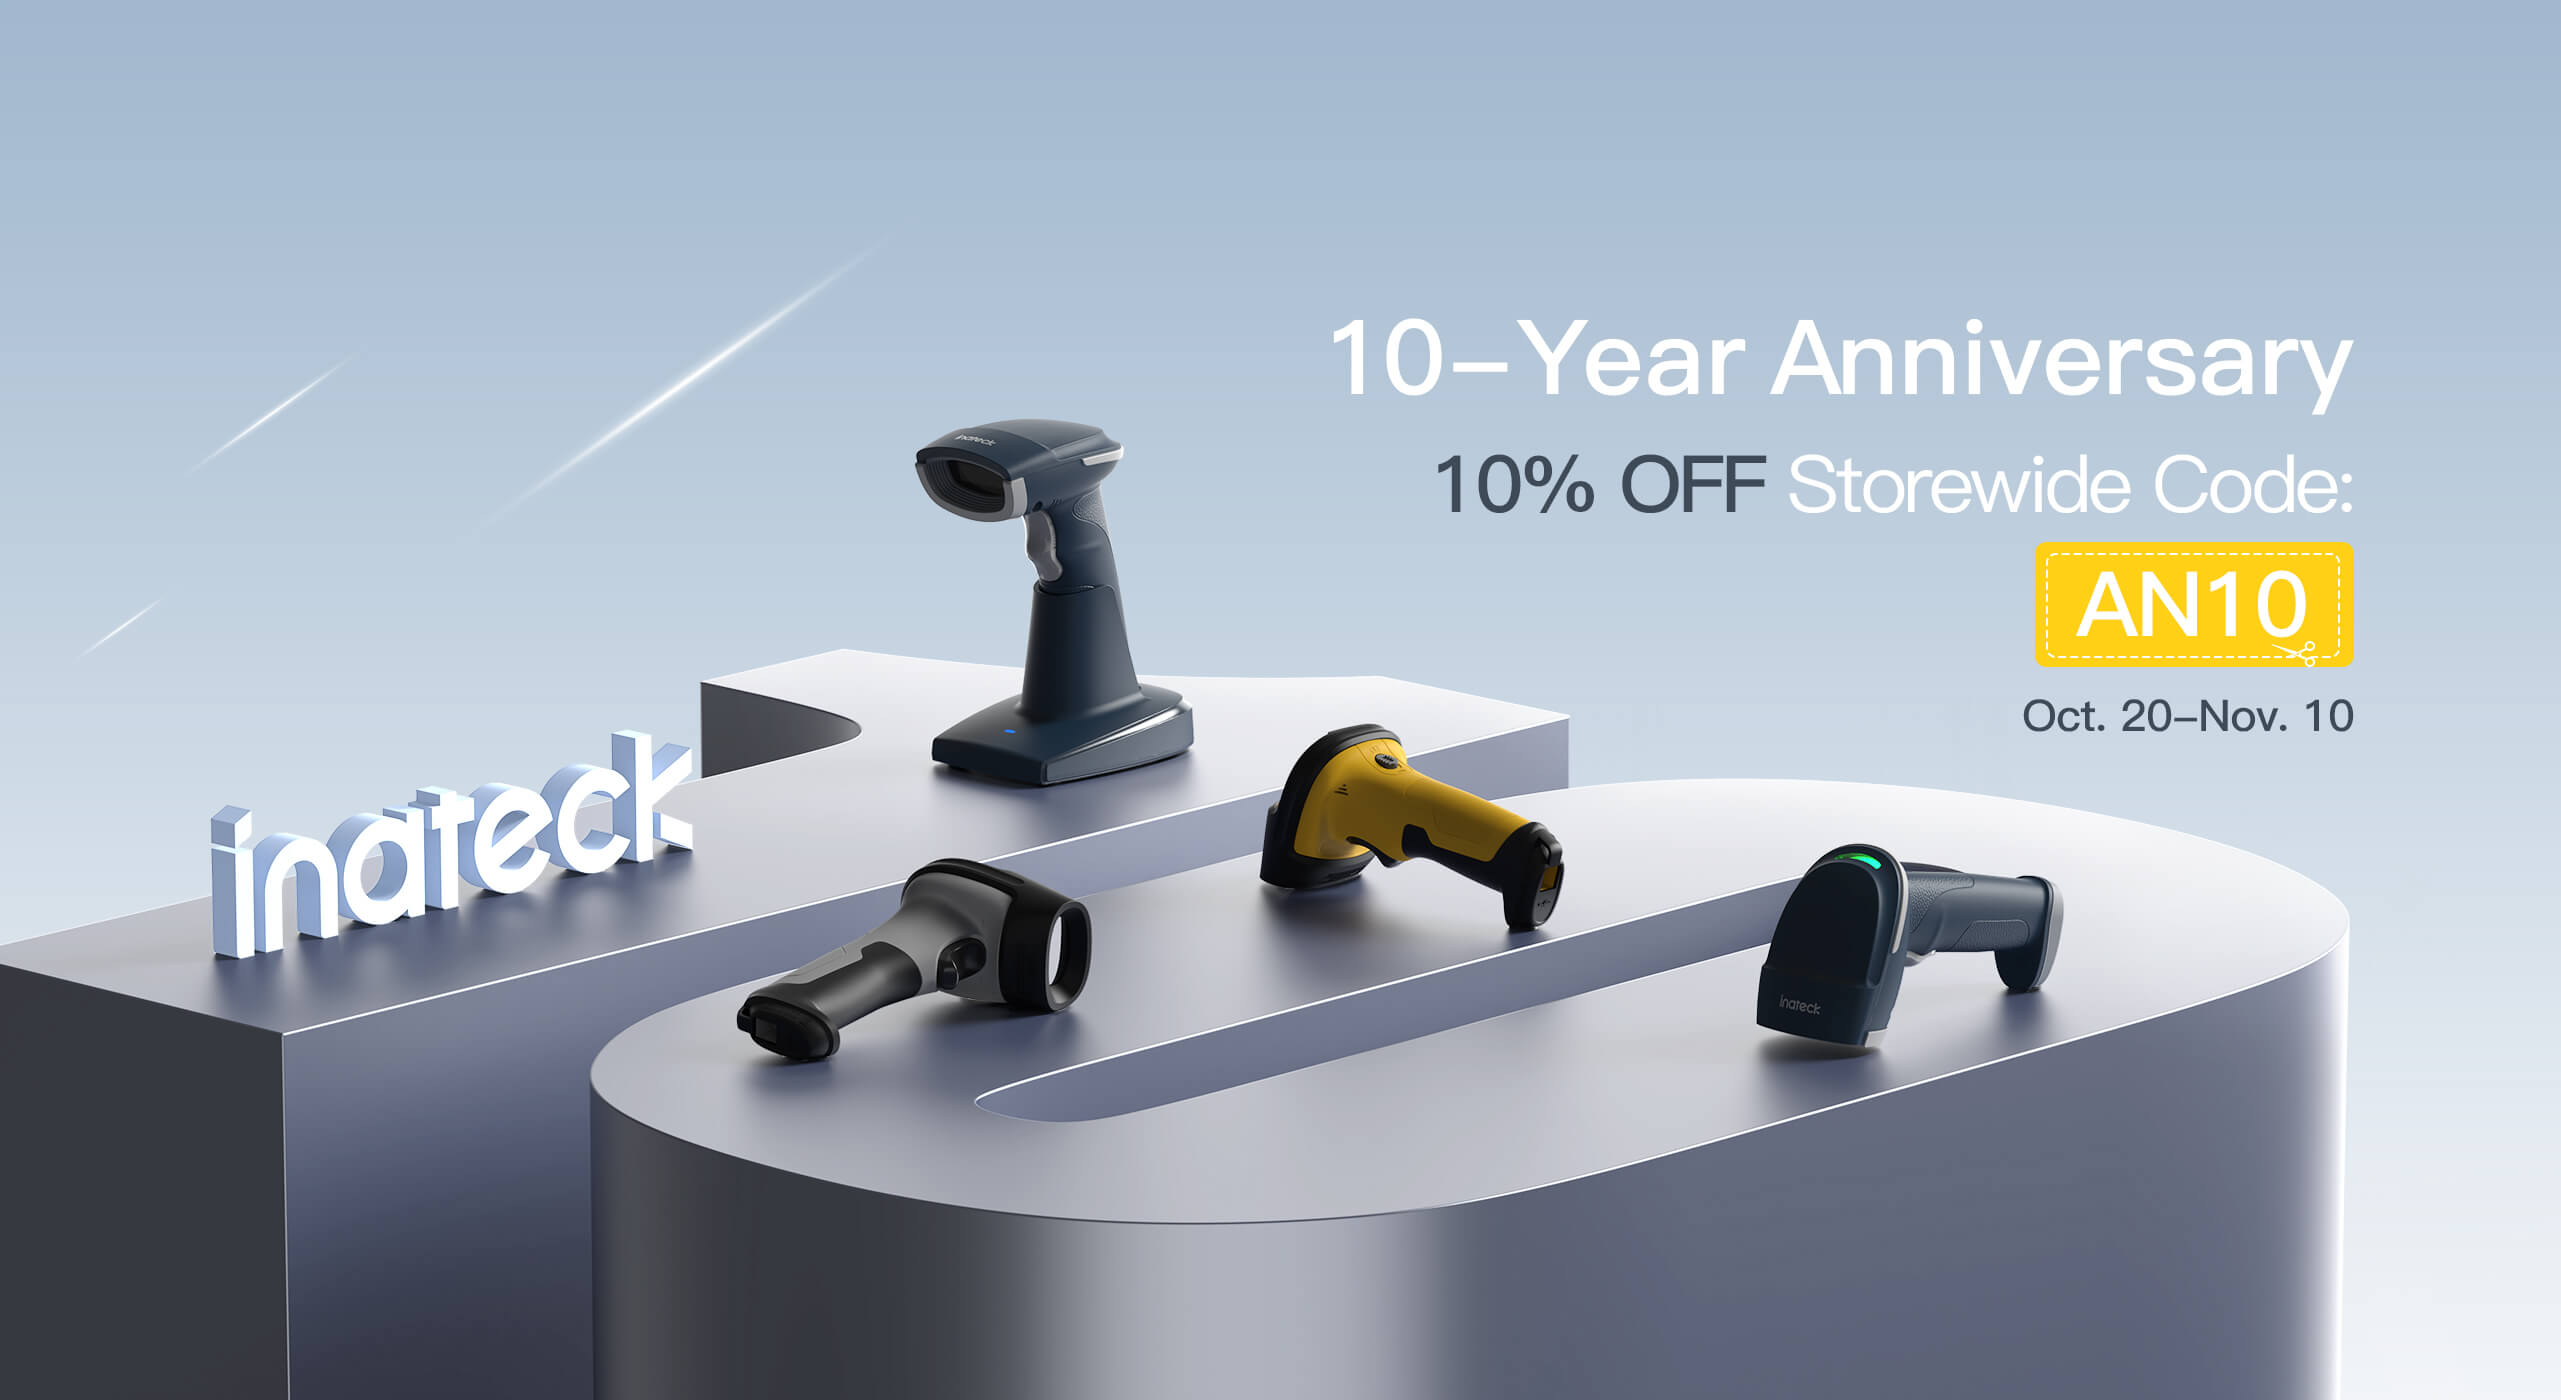 Inateck Barcode Scanner 10-Year Anniversary Sale